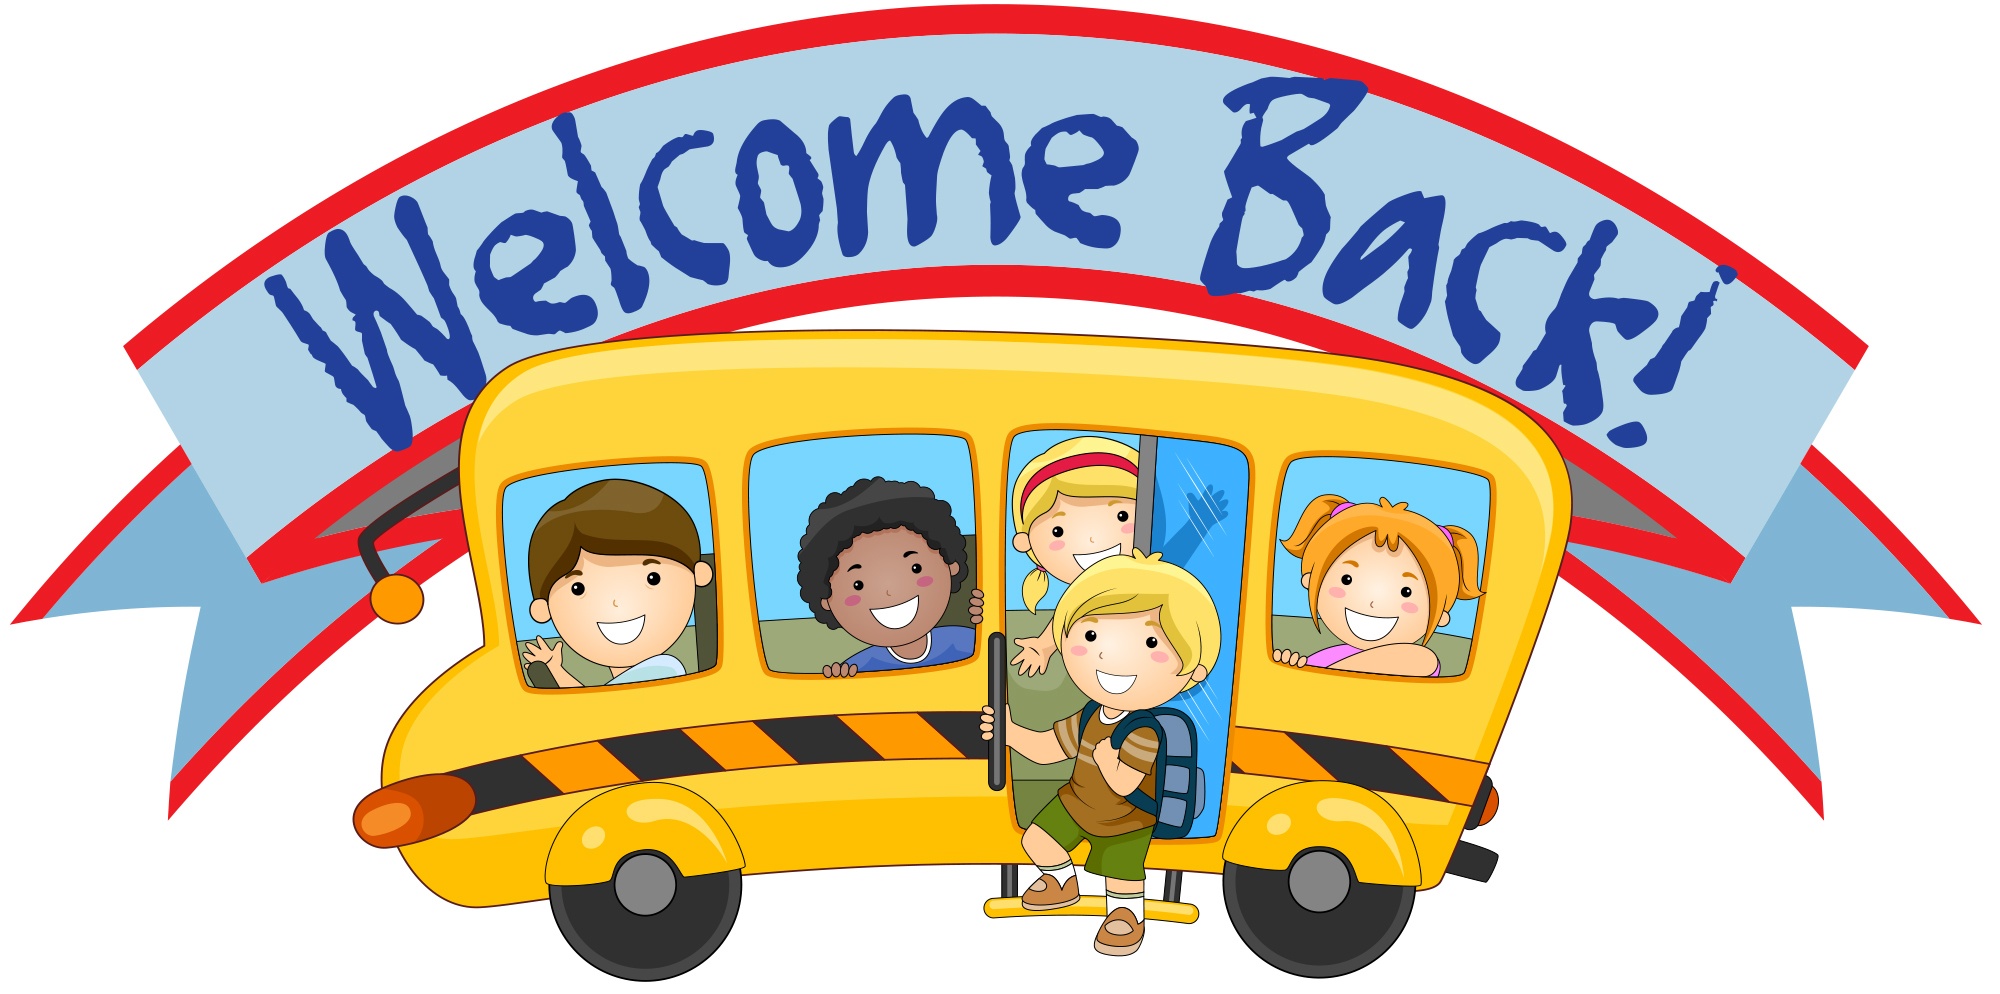 Welcome Back From Winter Break  We Hope You Had An Enjoyable Time With